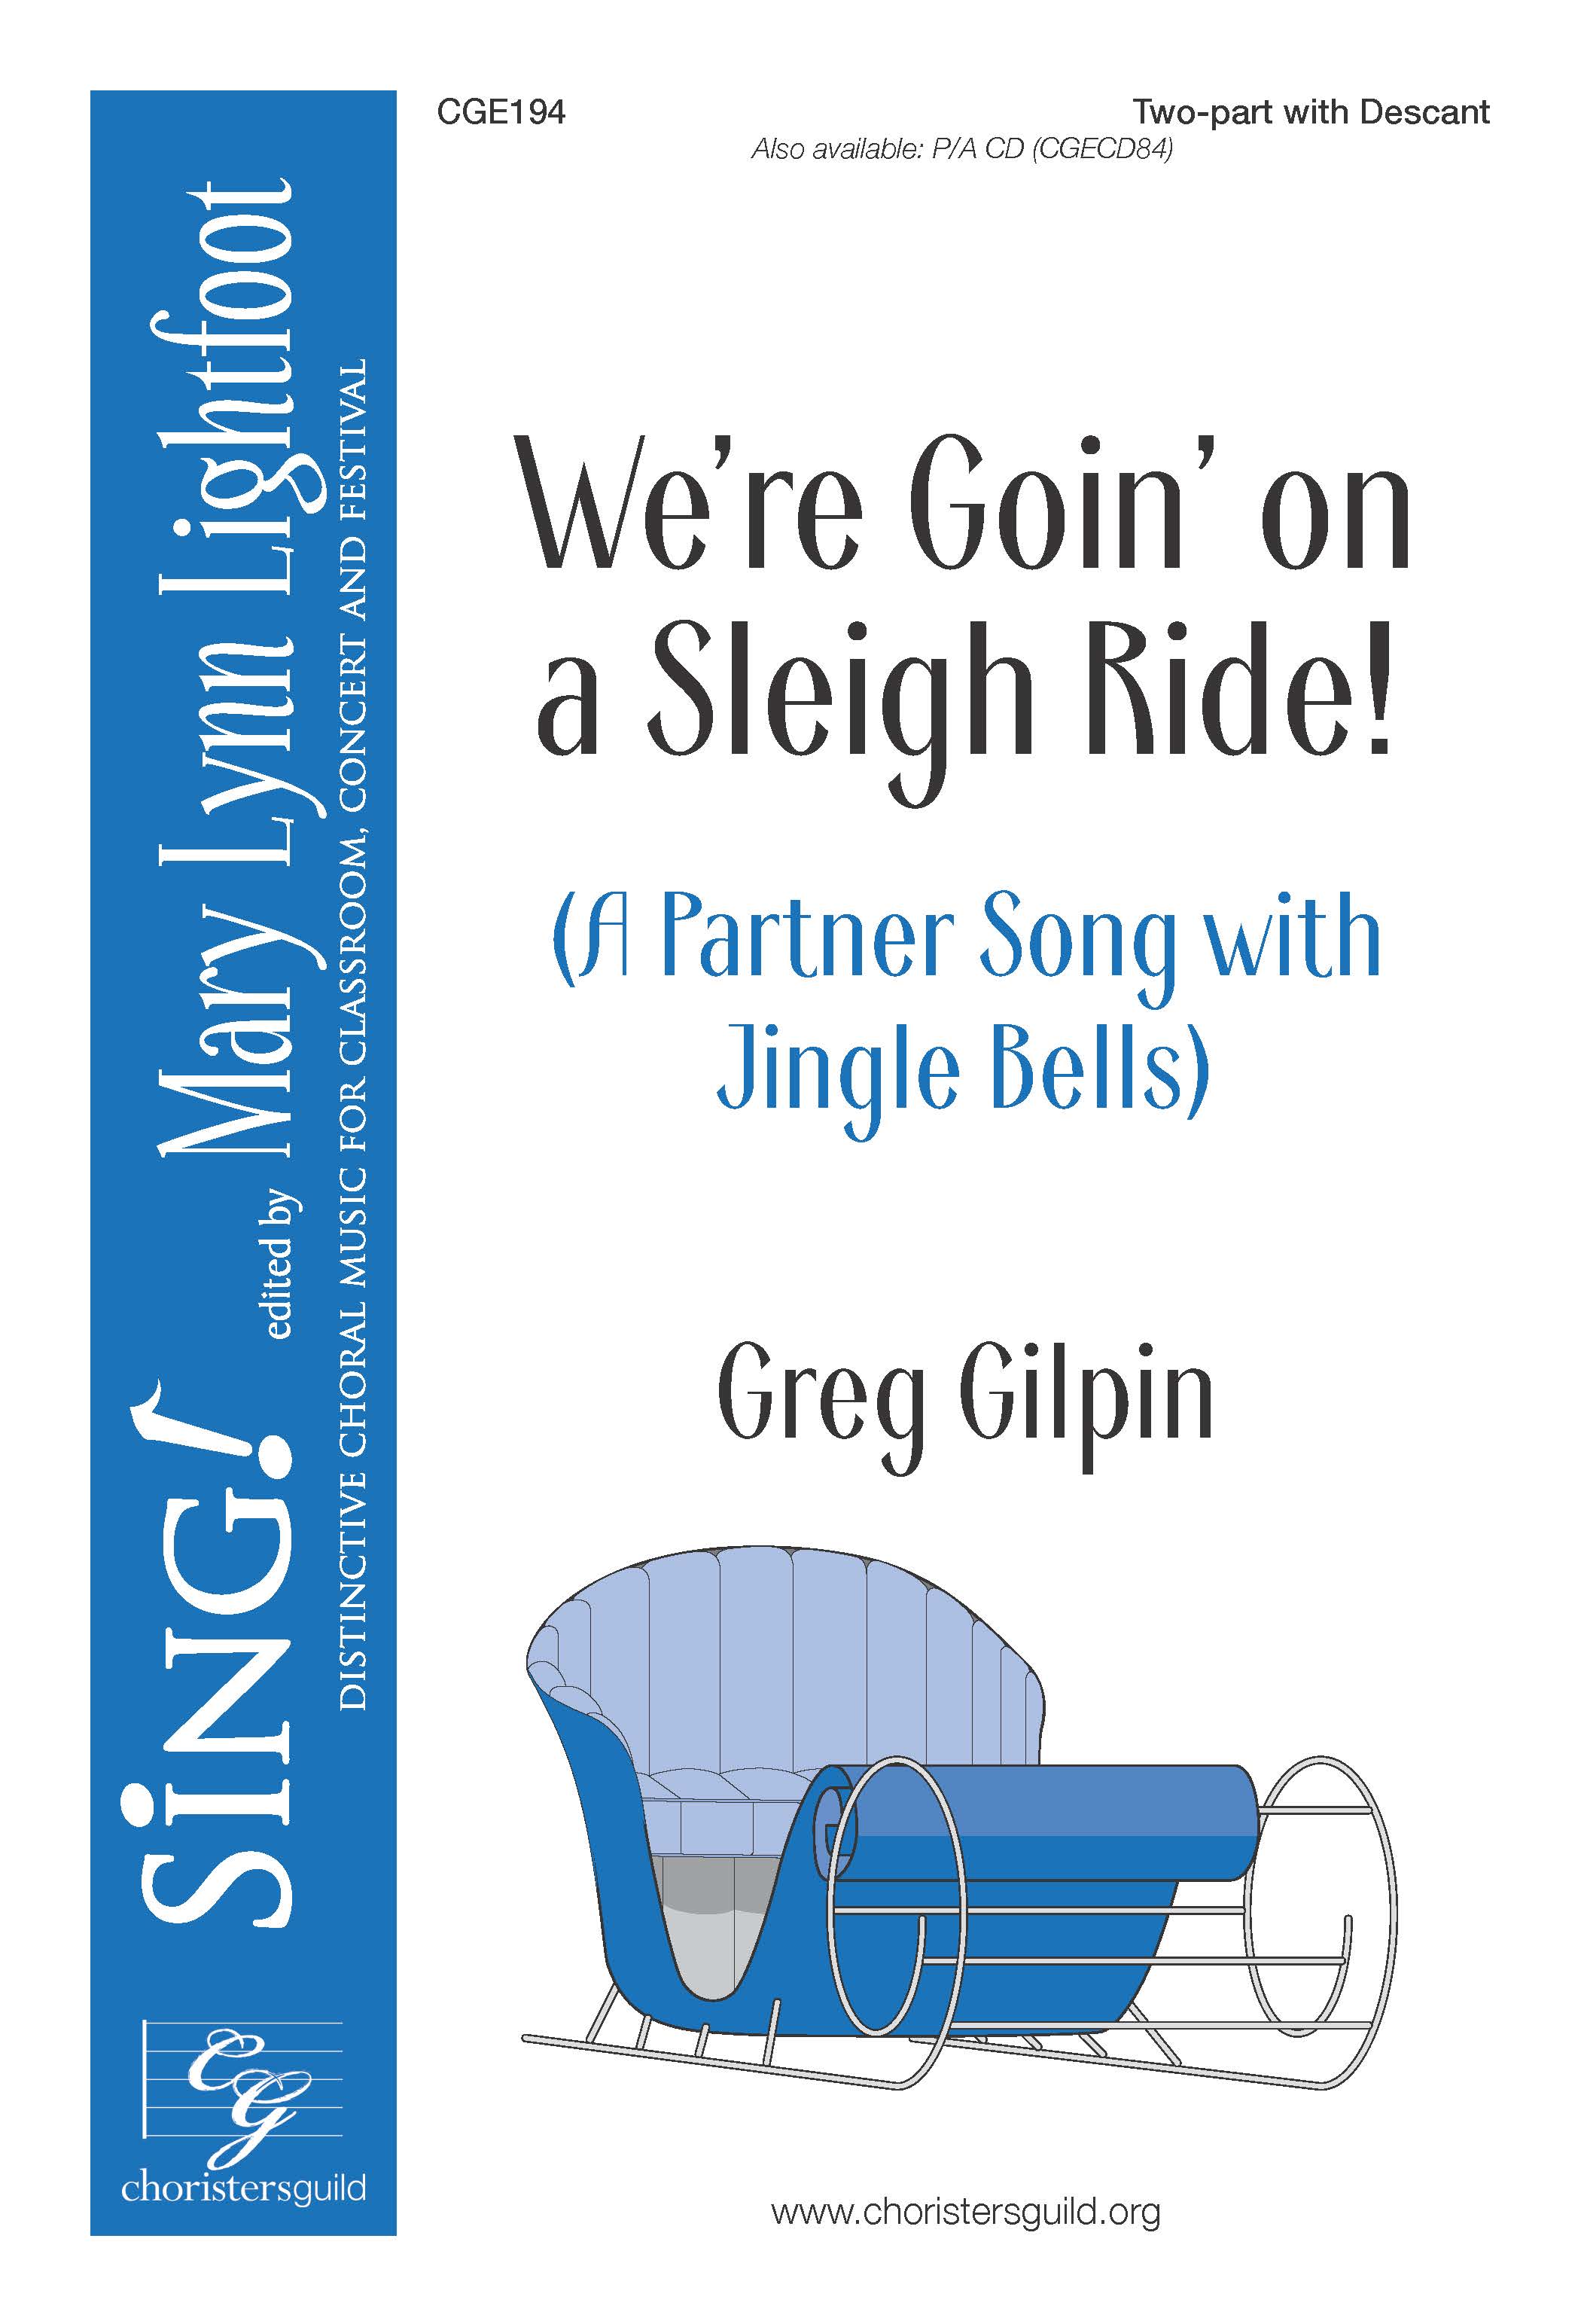 We're Goin' On a Sleigh Ride!  